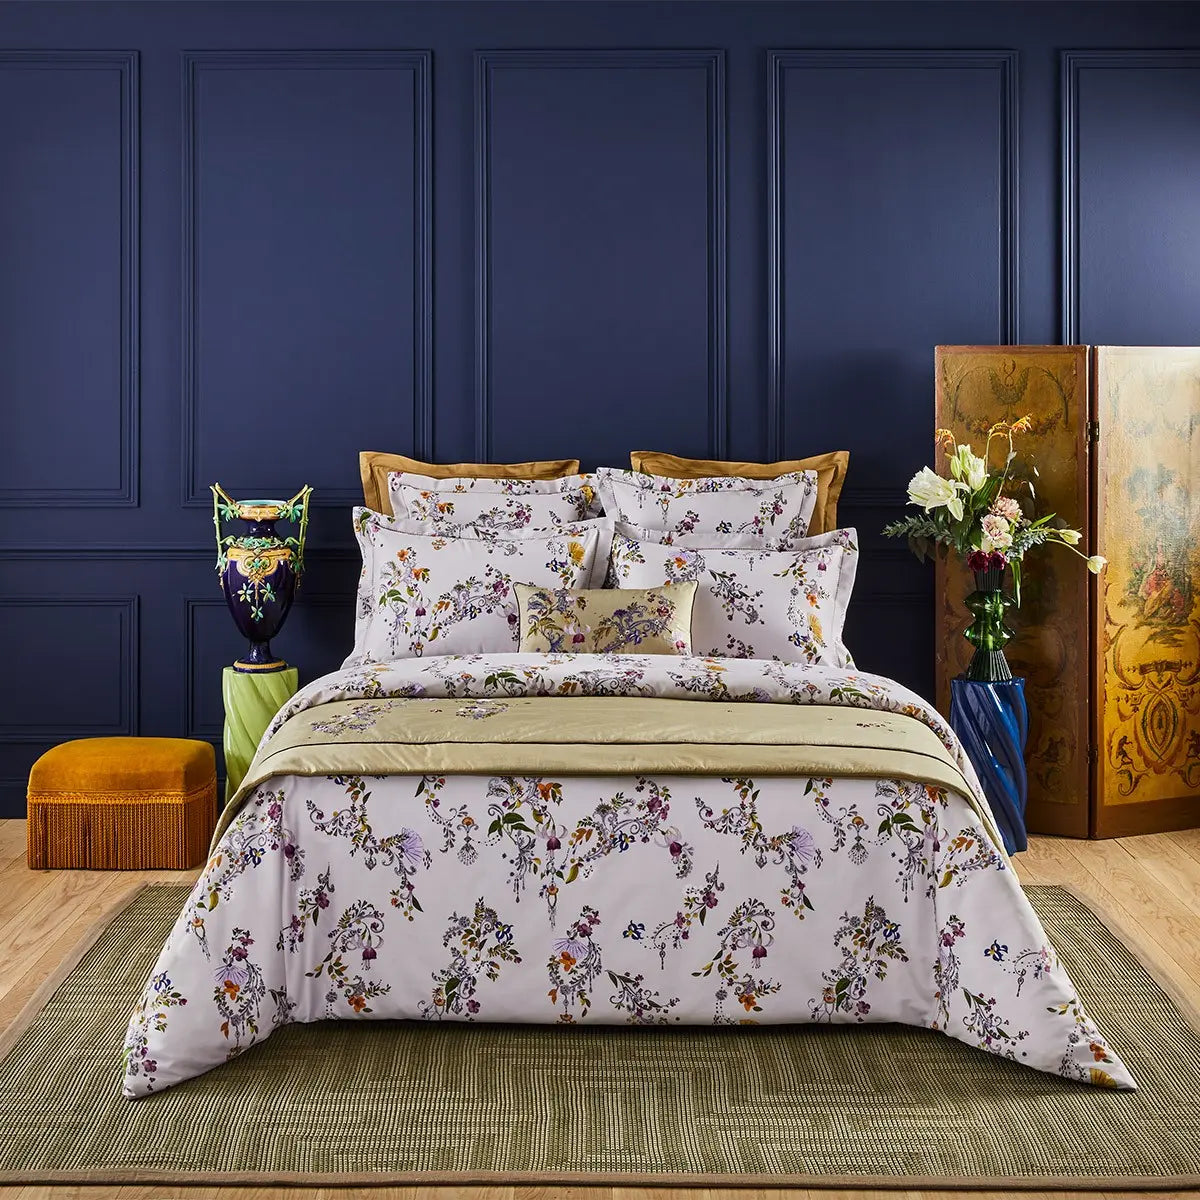 Yves Delorme Romances Bedding Collection in a room